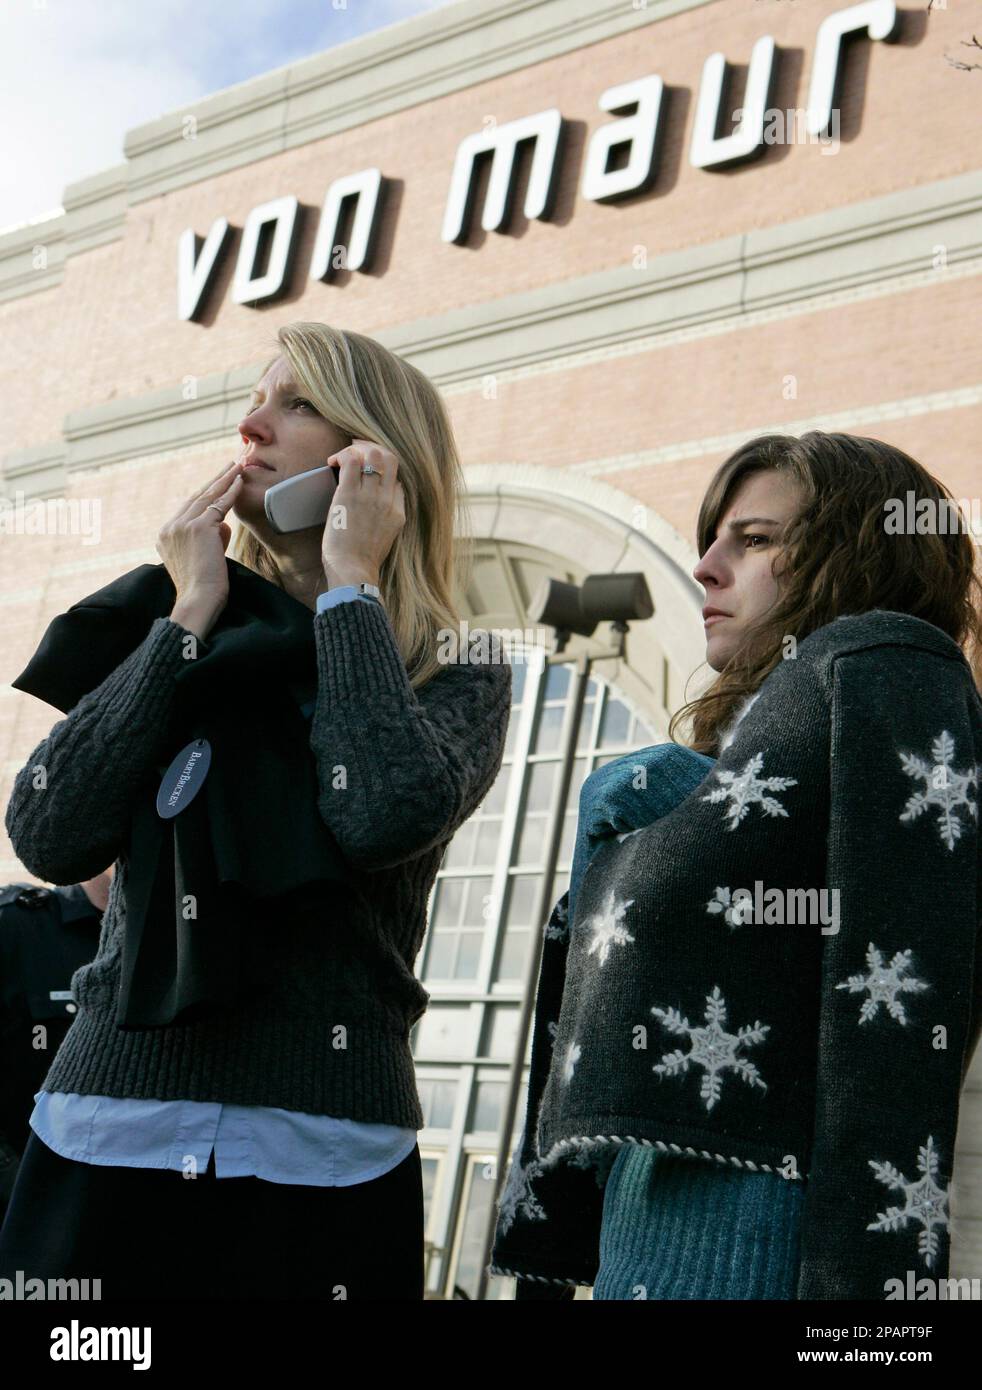 Delores Whitcomb, left, hugs an unidentified Von Maur associate at the Von  Maur department store in Westroads Mall Thursday Dec. 20, 2007 in Omaha,  Neb. The store opened for business after being